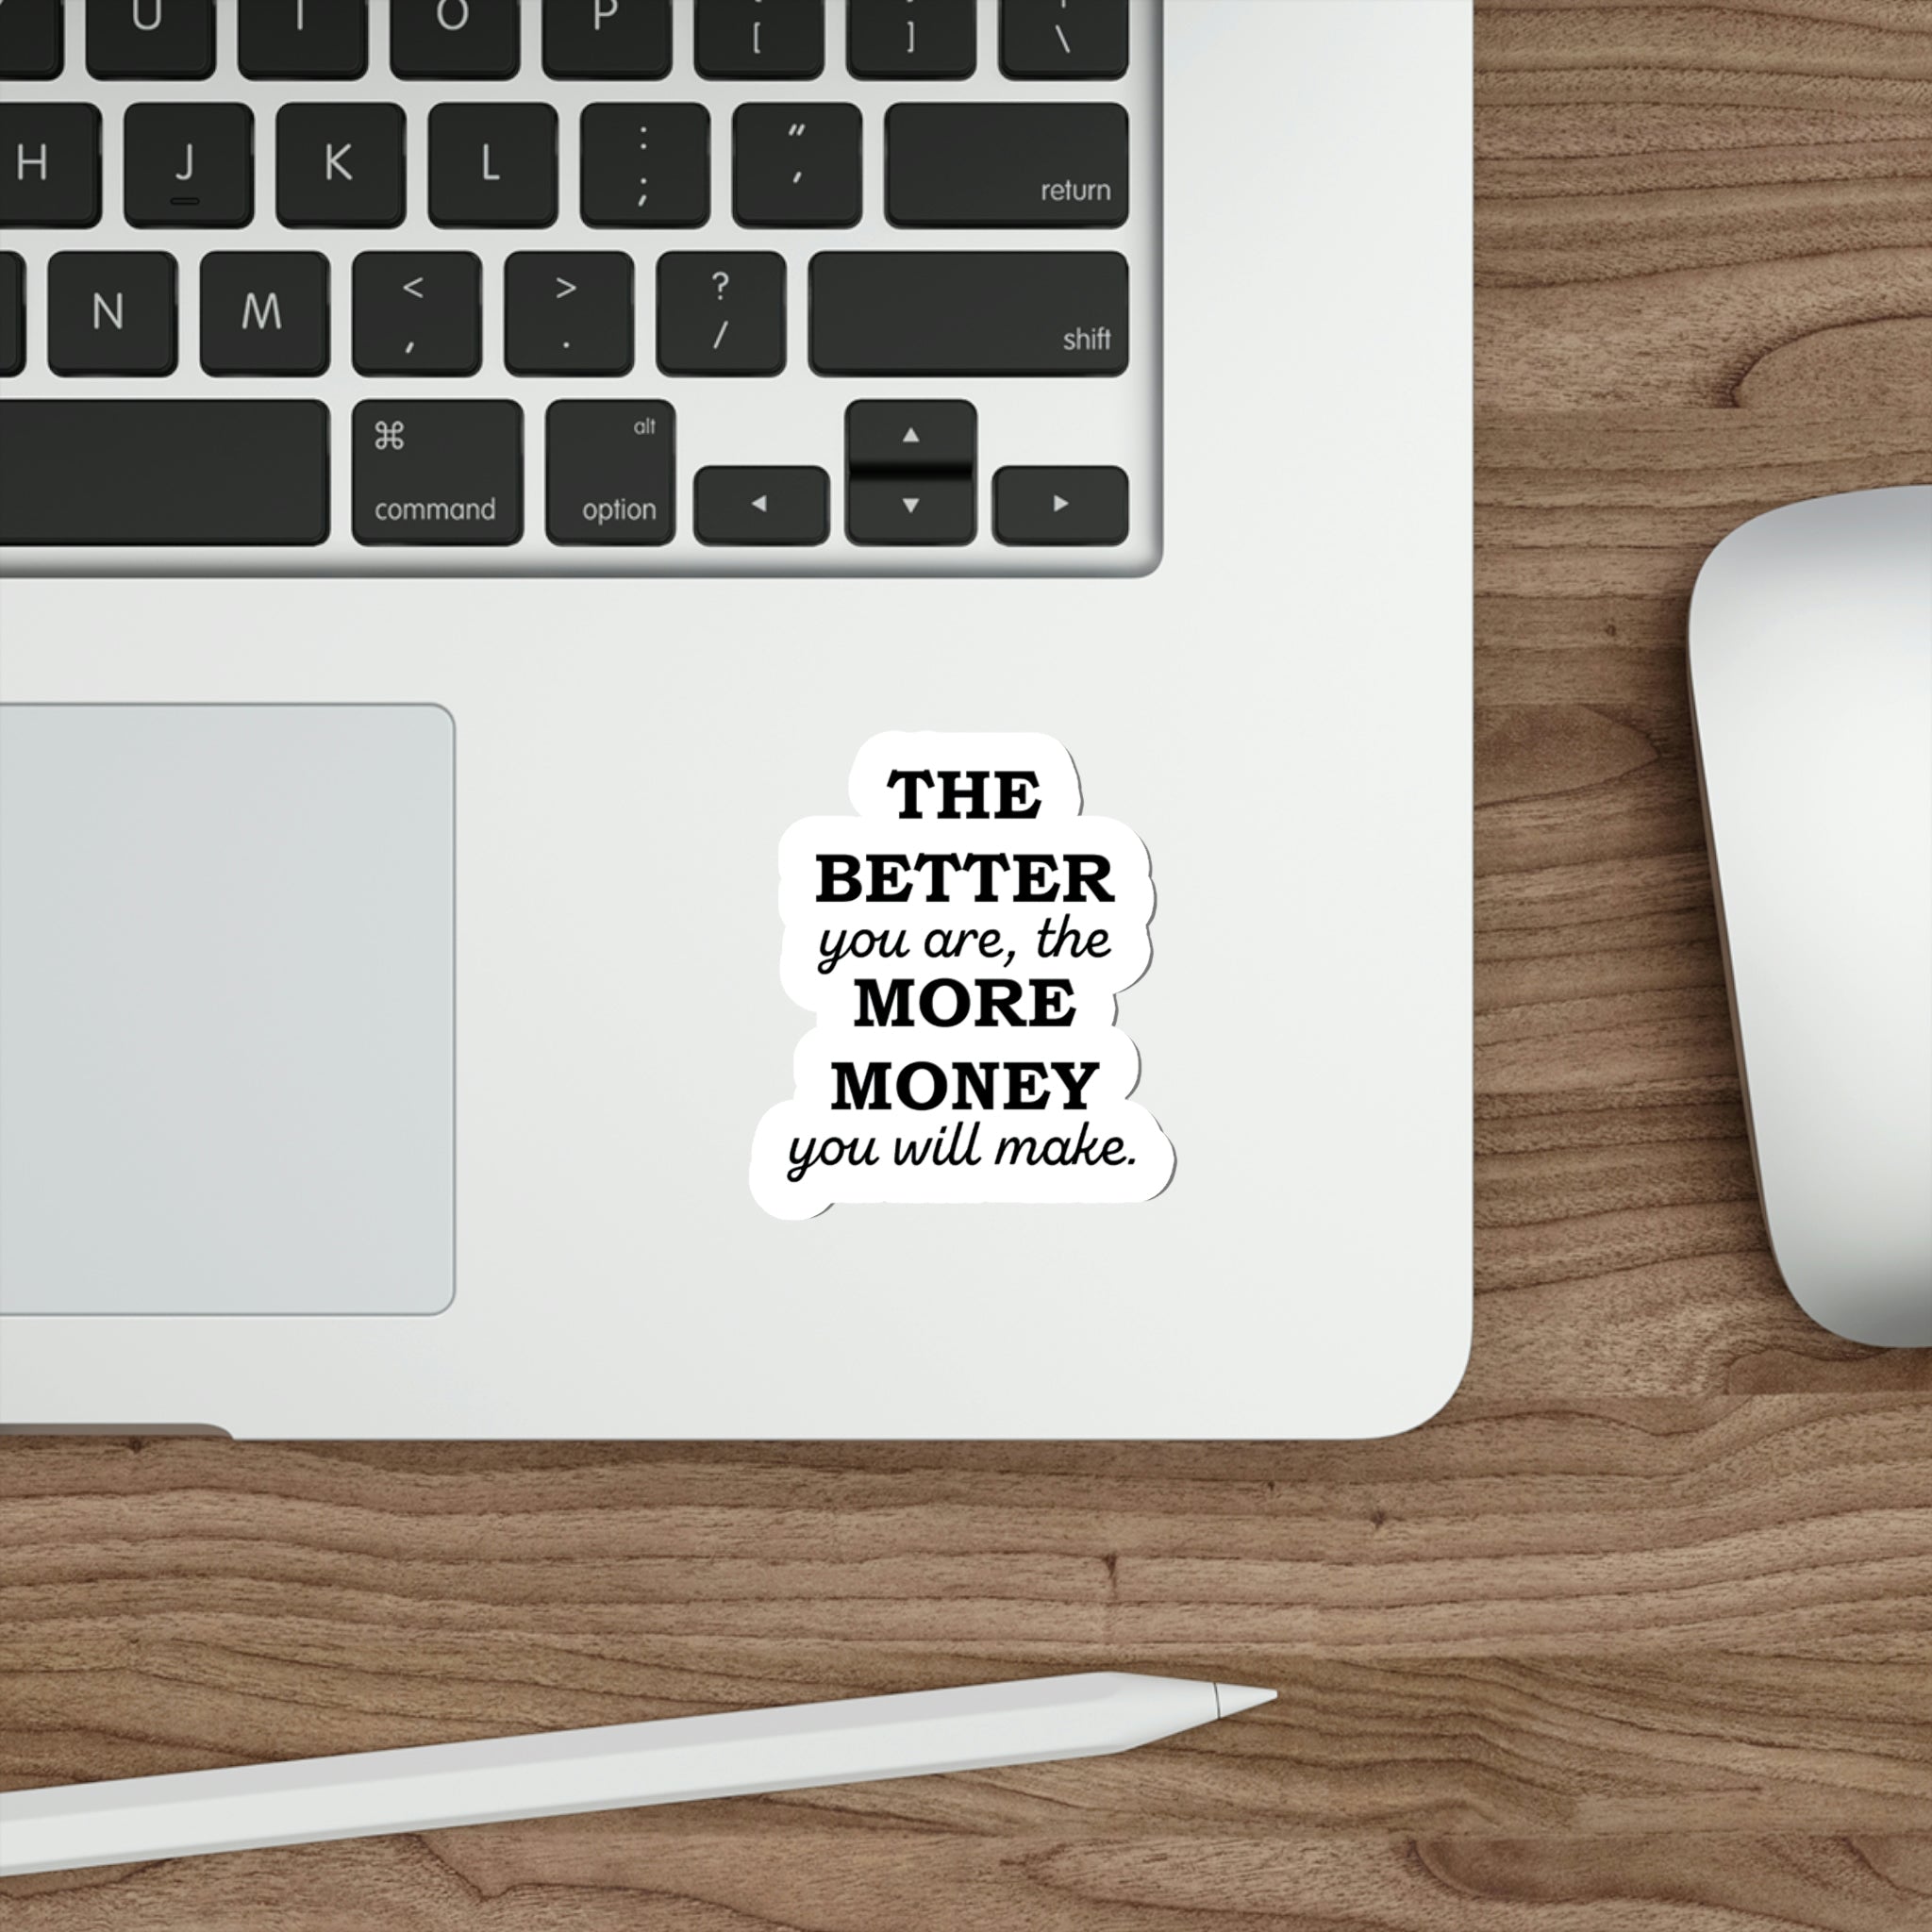 Short motivational quotes for entrepreneurs | Shop stickers #size_3x3-inches